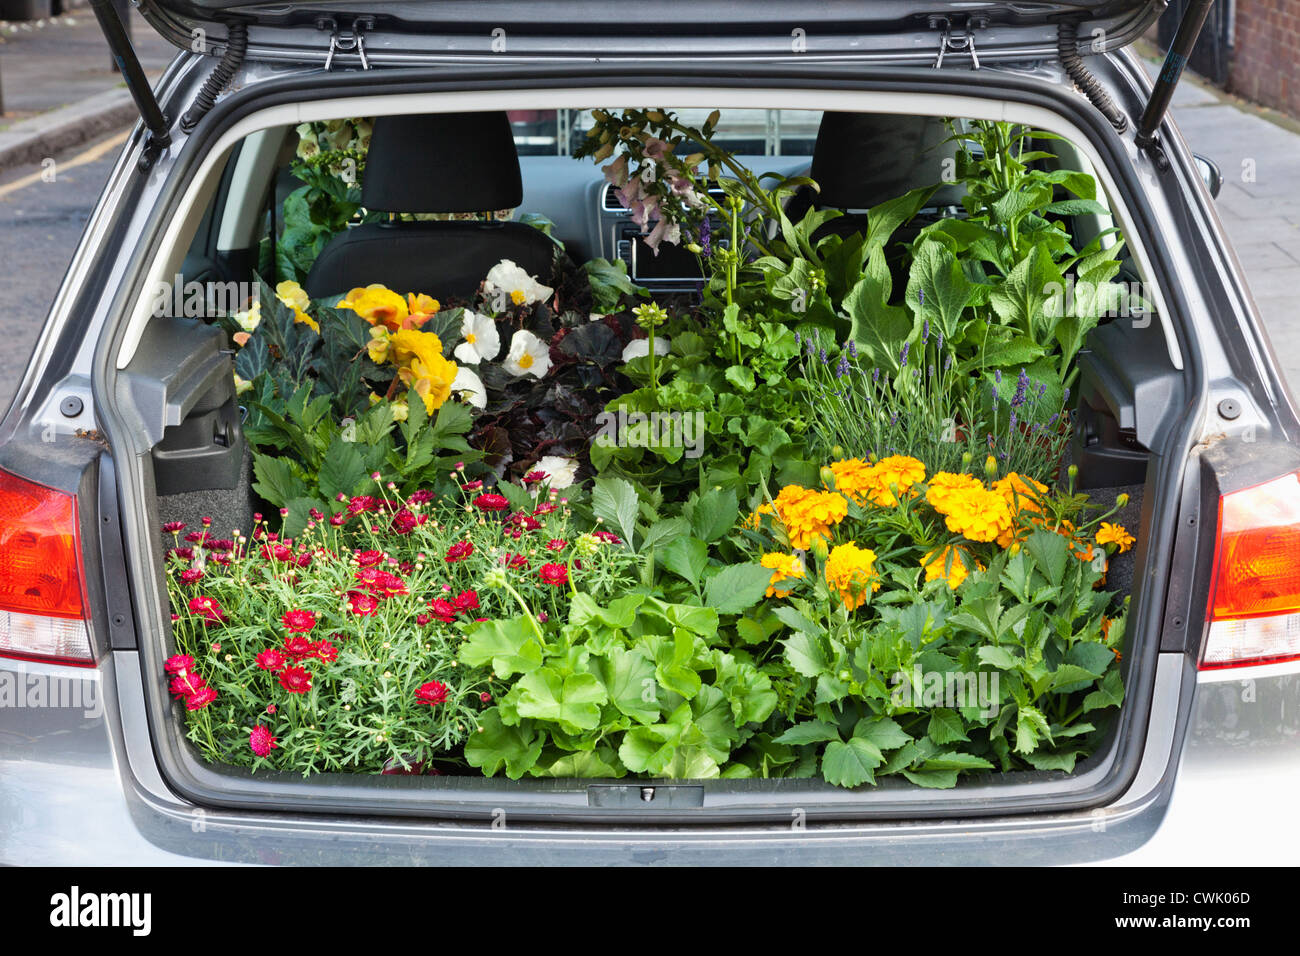 England, London, Columbia Road Flower Market, Car Boot Filled with Plants Stock Photo